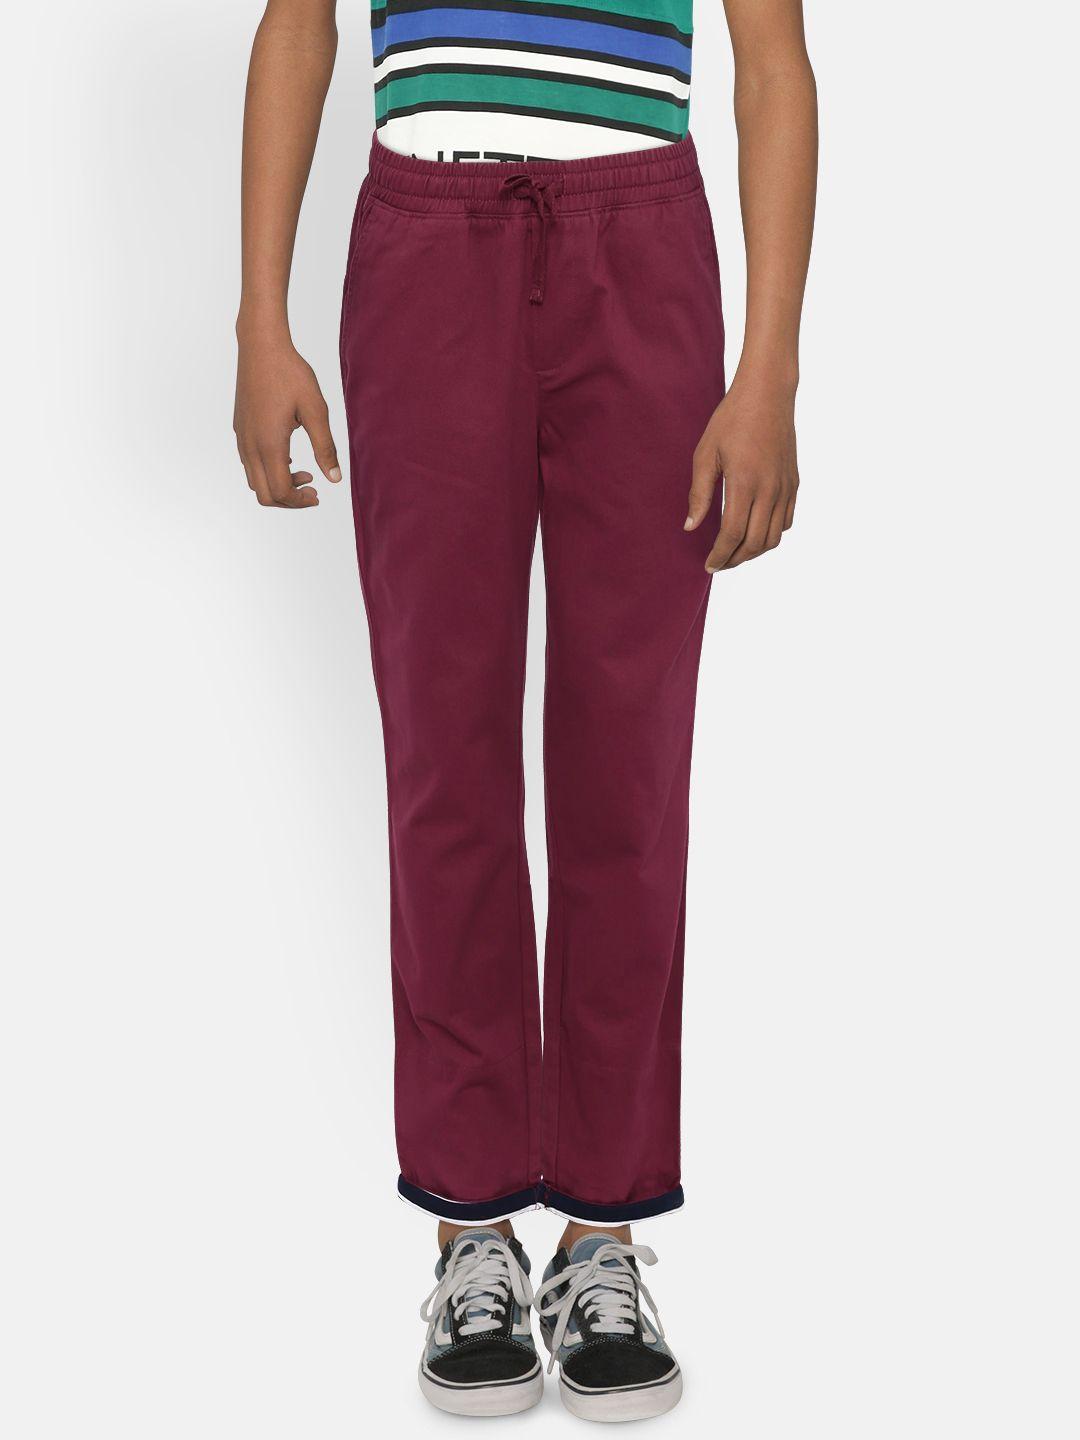 United Colors of Benetton Boys Maroon Regular Fit Solid Trousers